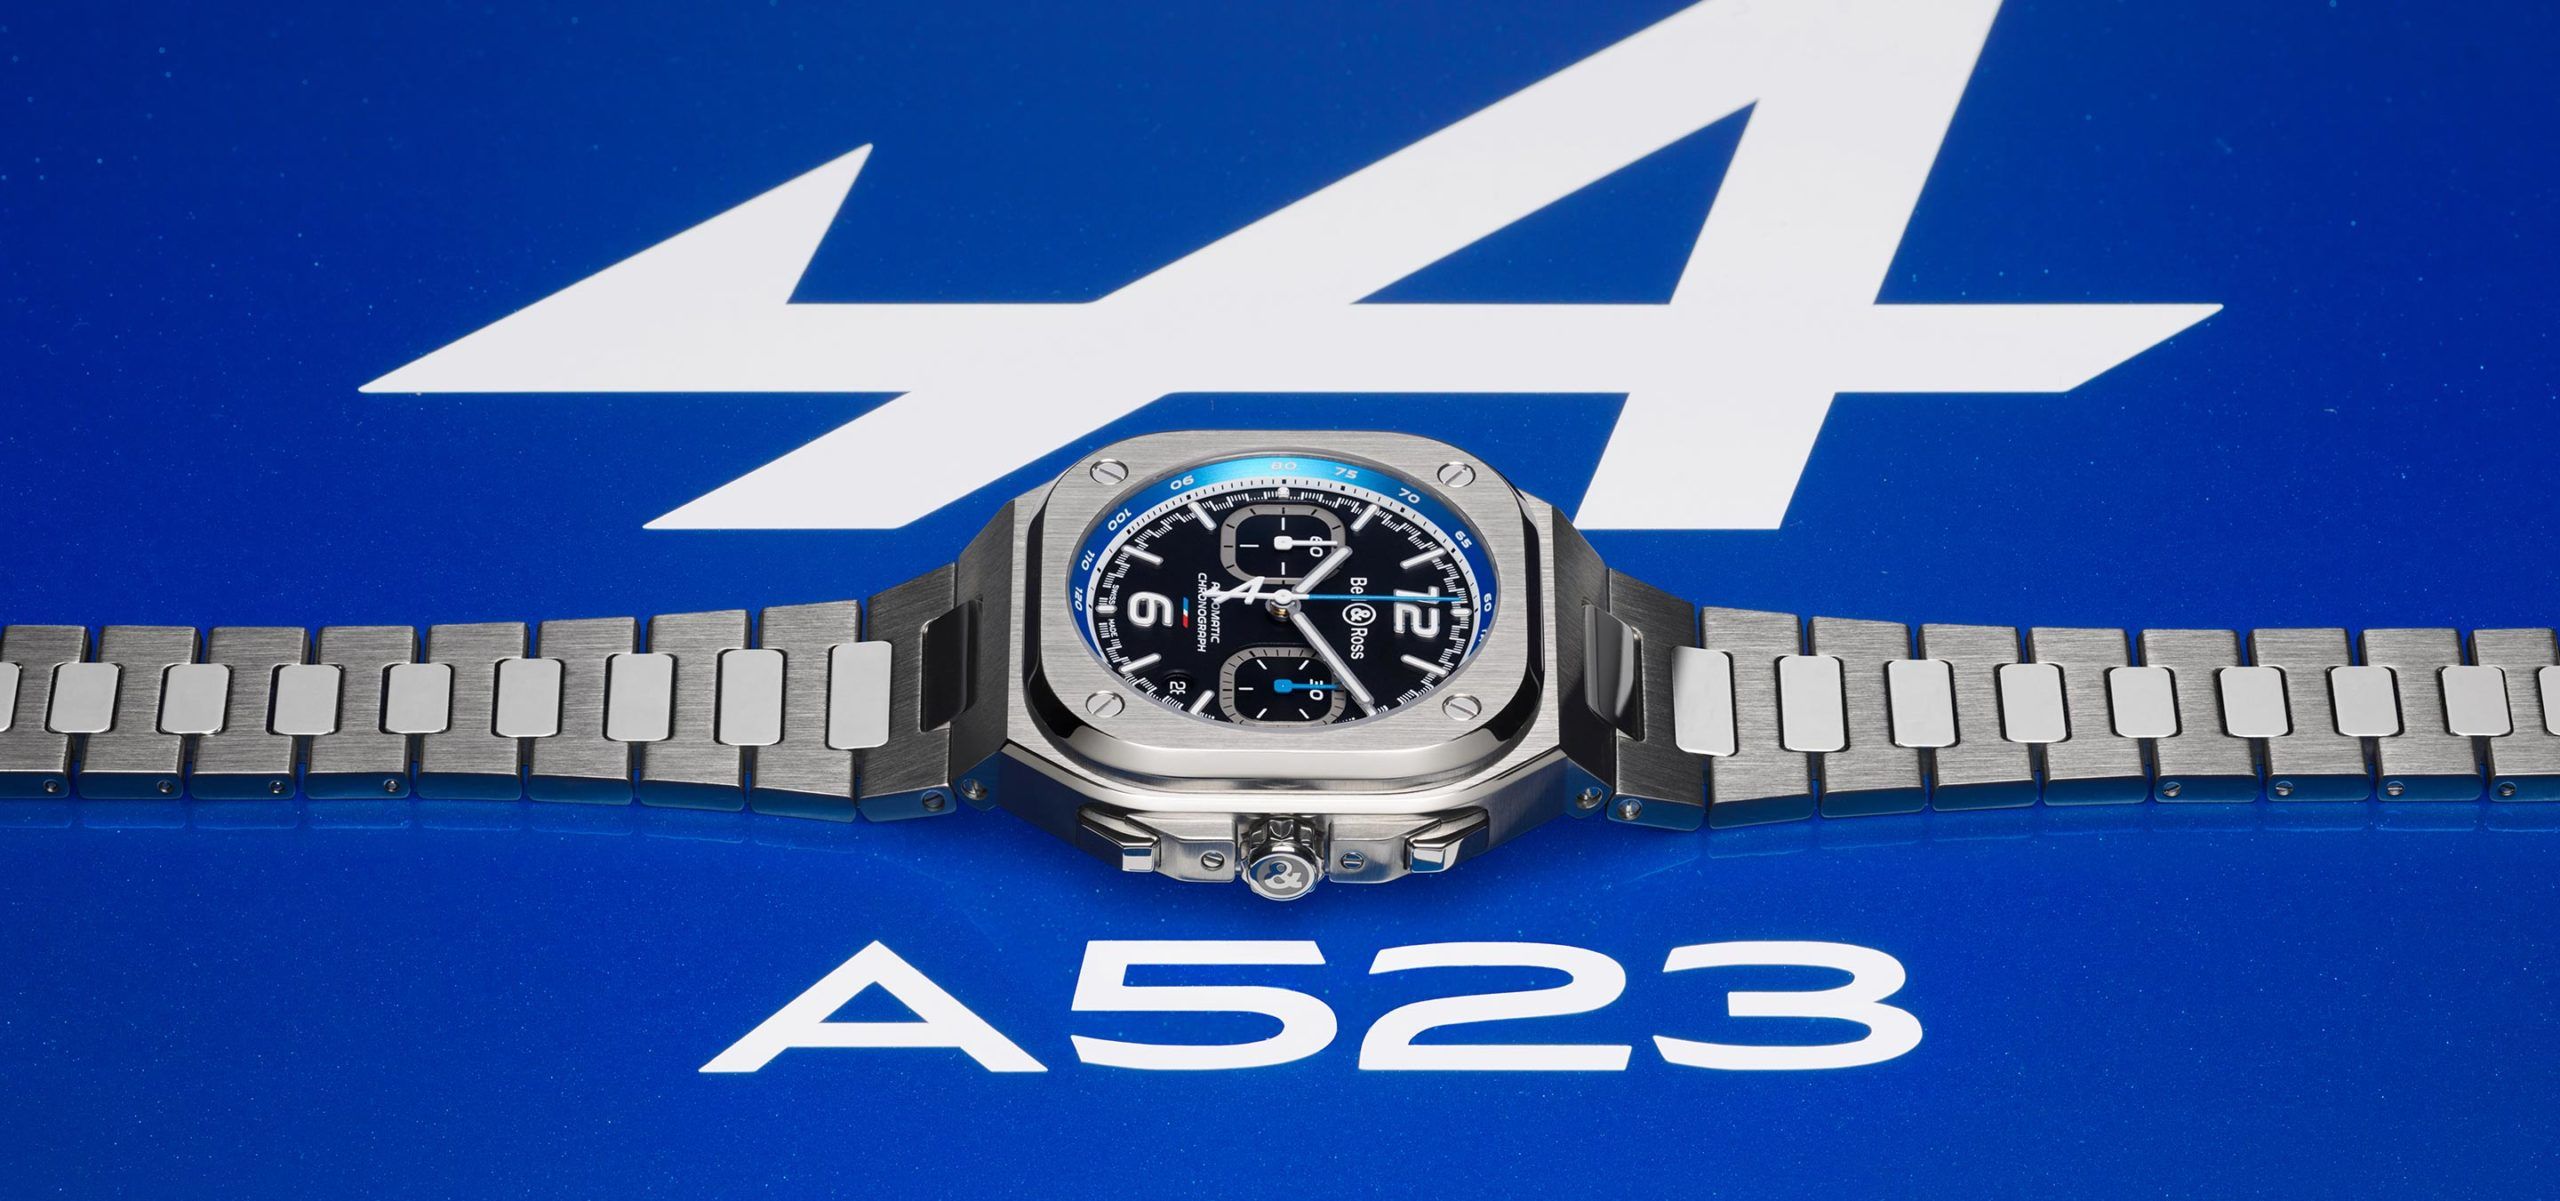 Racing Ahead: The Bell & Ross BR 05 Chrono A523 Brings Alpine F1's Speed To The Wrist